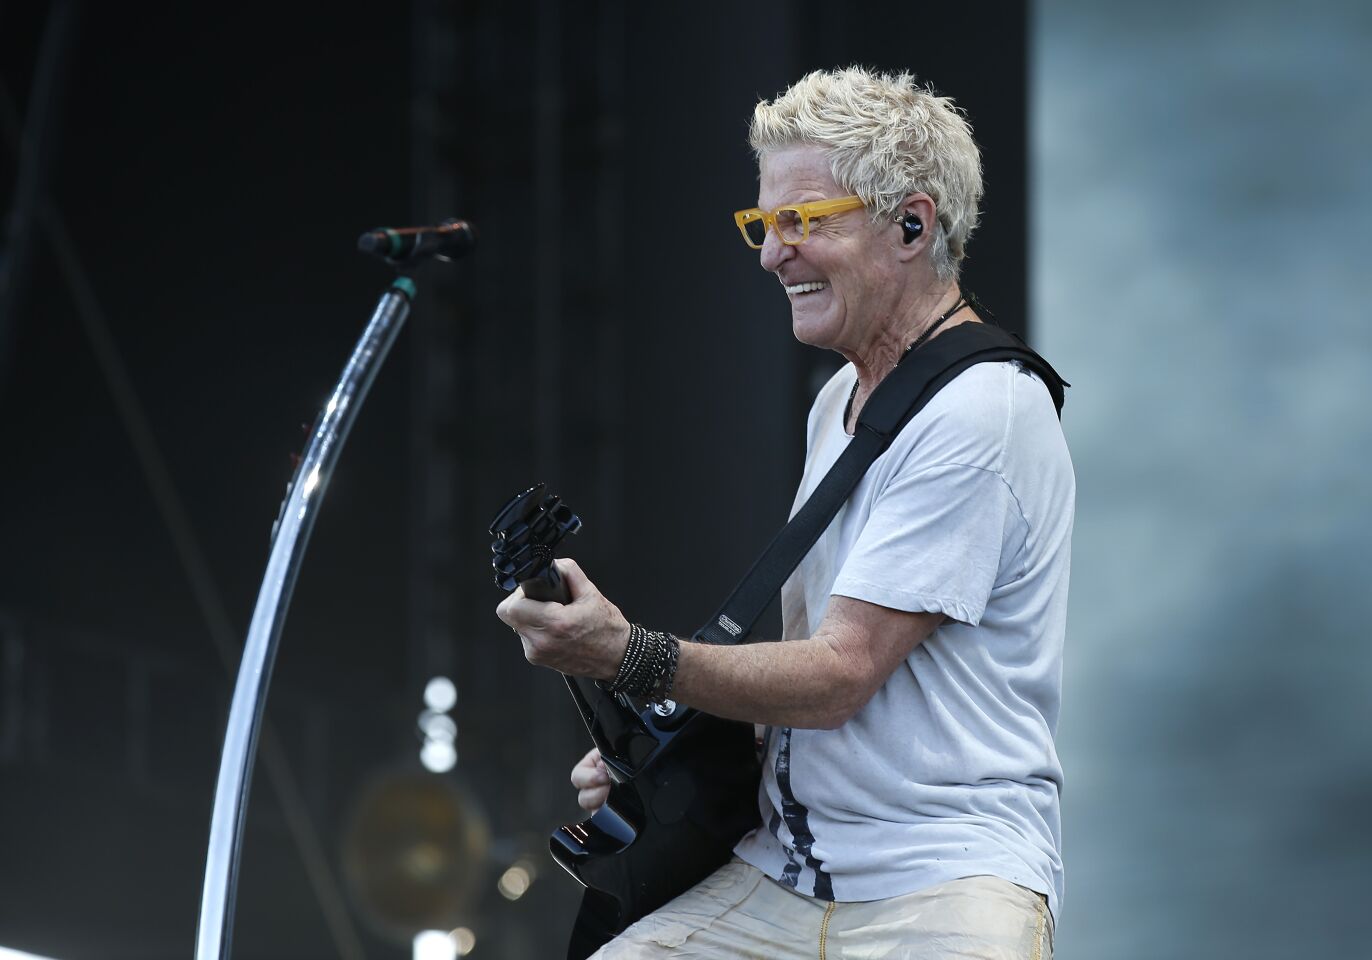 Kevin Cronin of Reo Speedwagon plays on the Sunset Cliffs Stage at KAABOO Del Mar on Sept. 13, 2019.